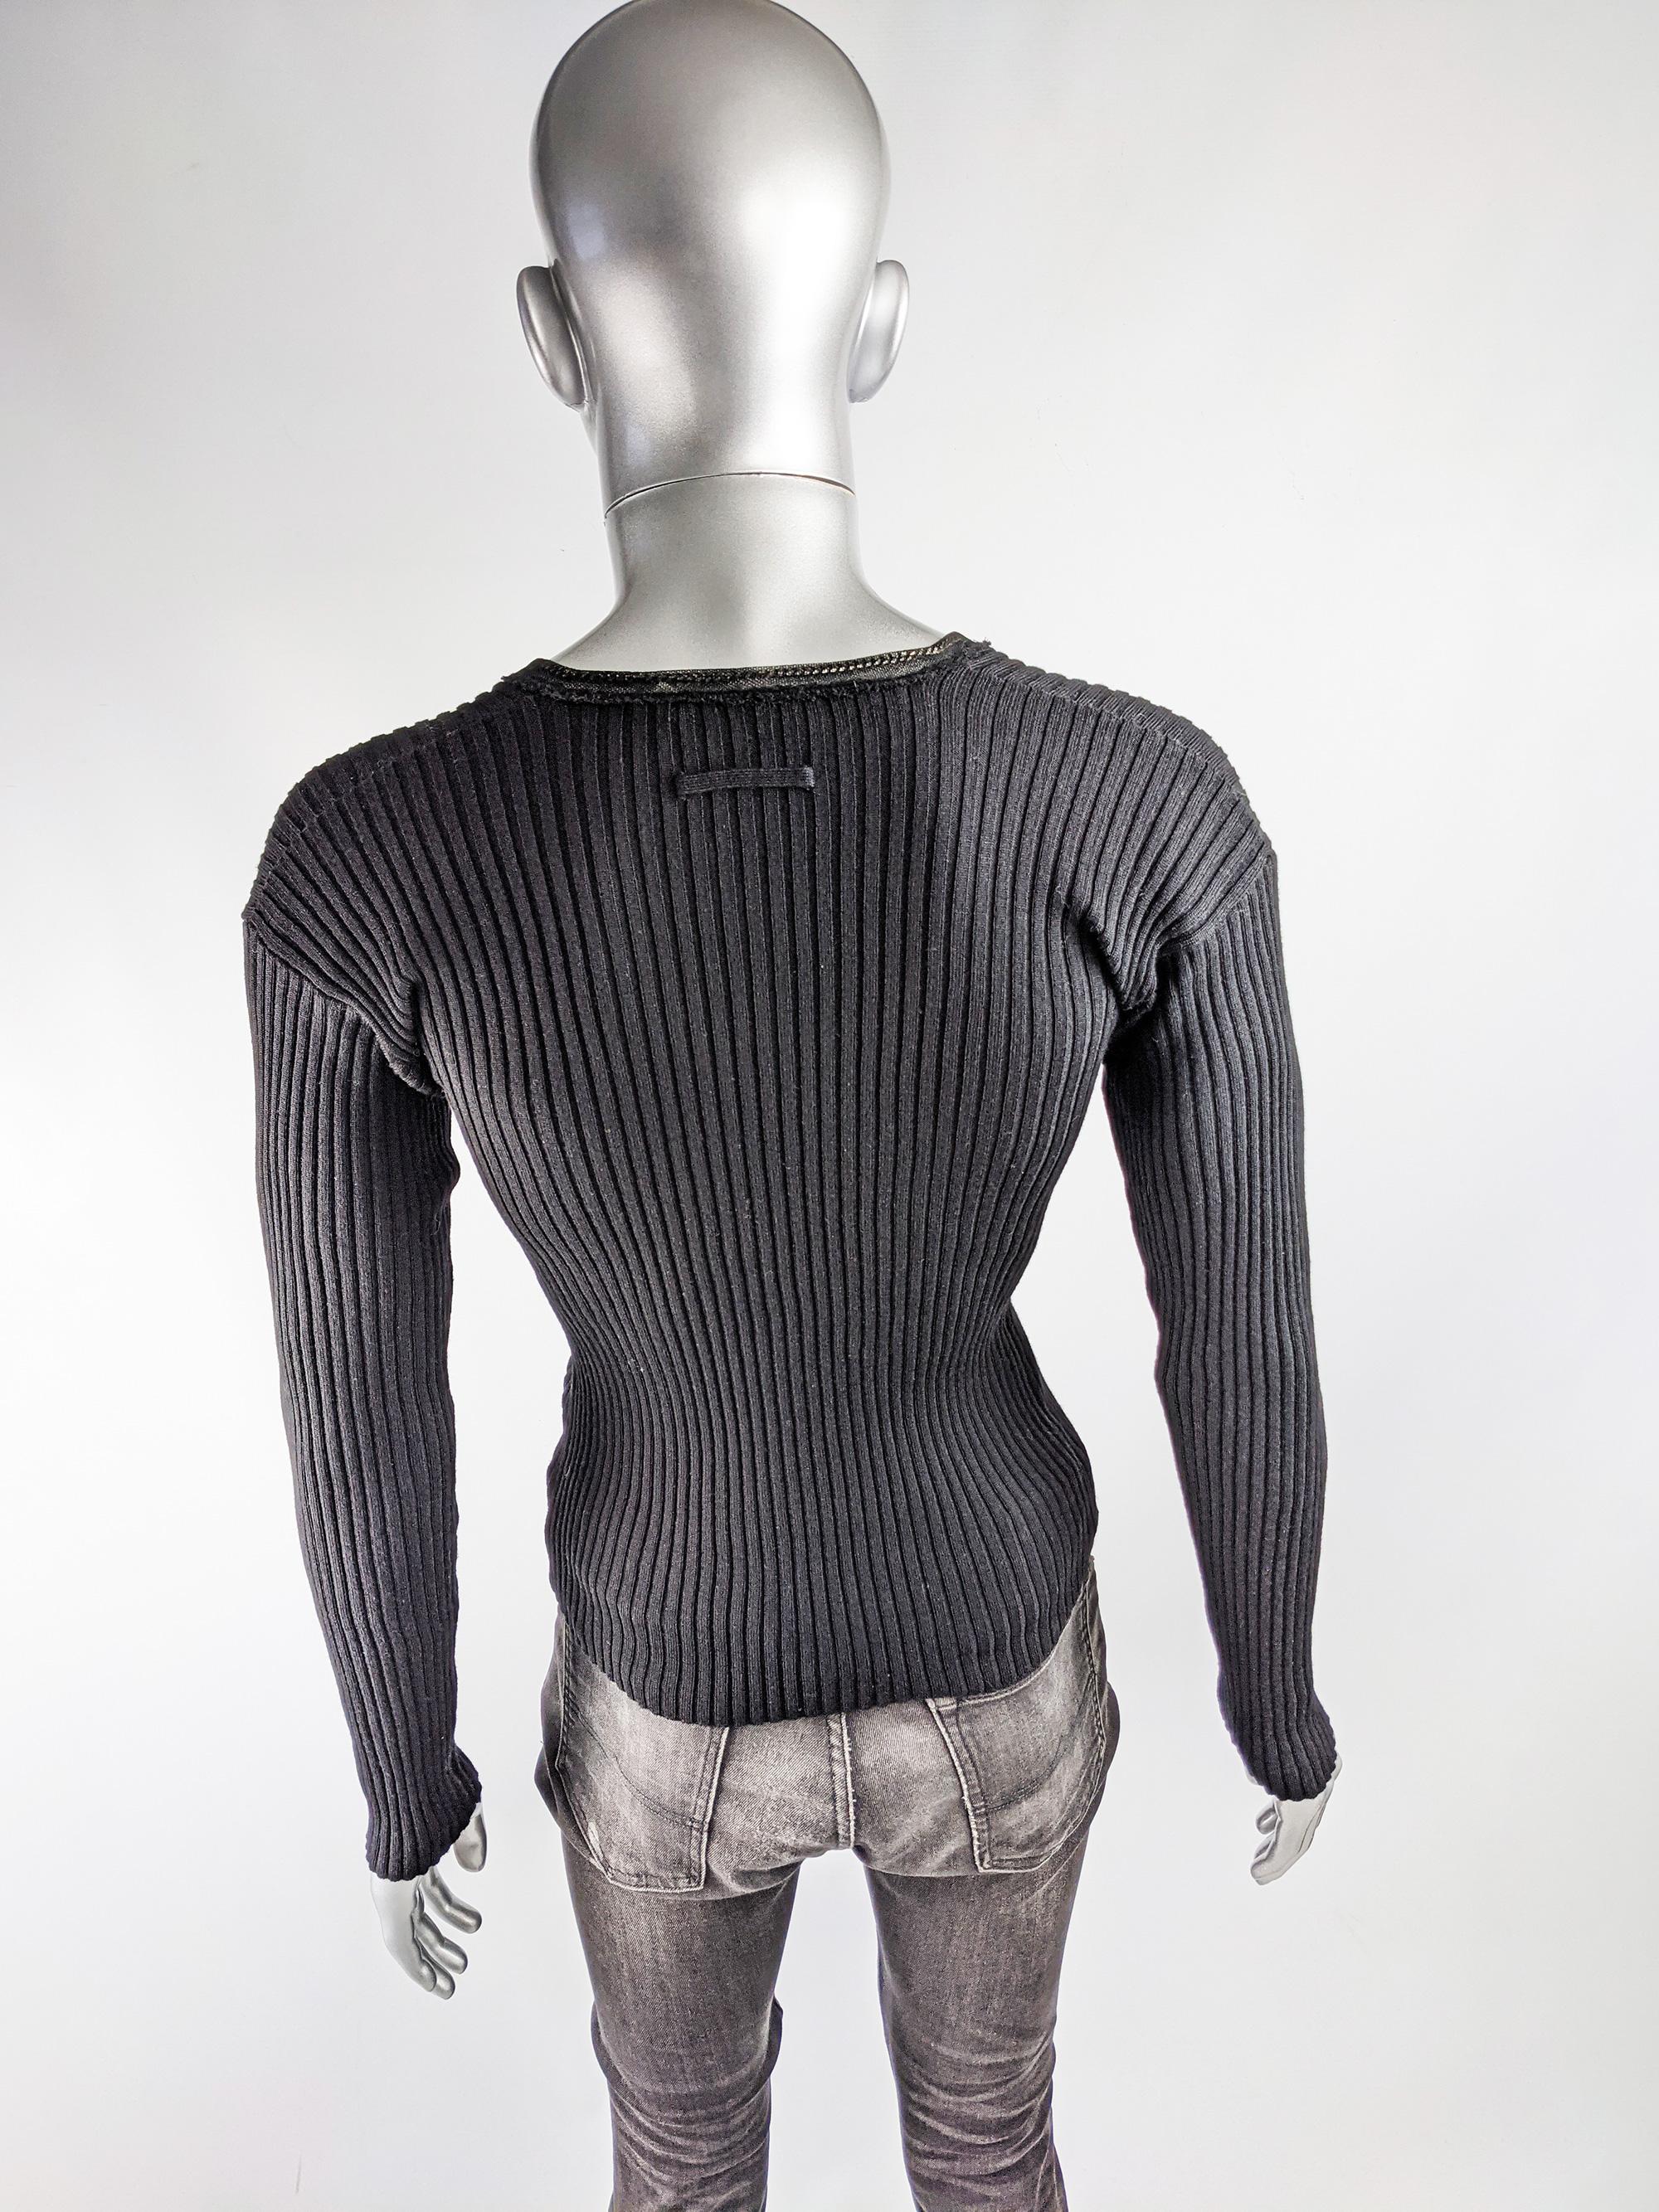 Jean Paul Gaultier Vintage Mens Chain Ribbed Knit Top 1